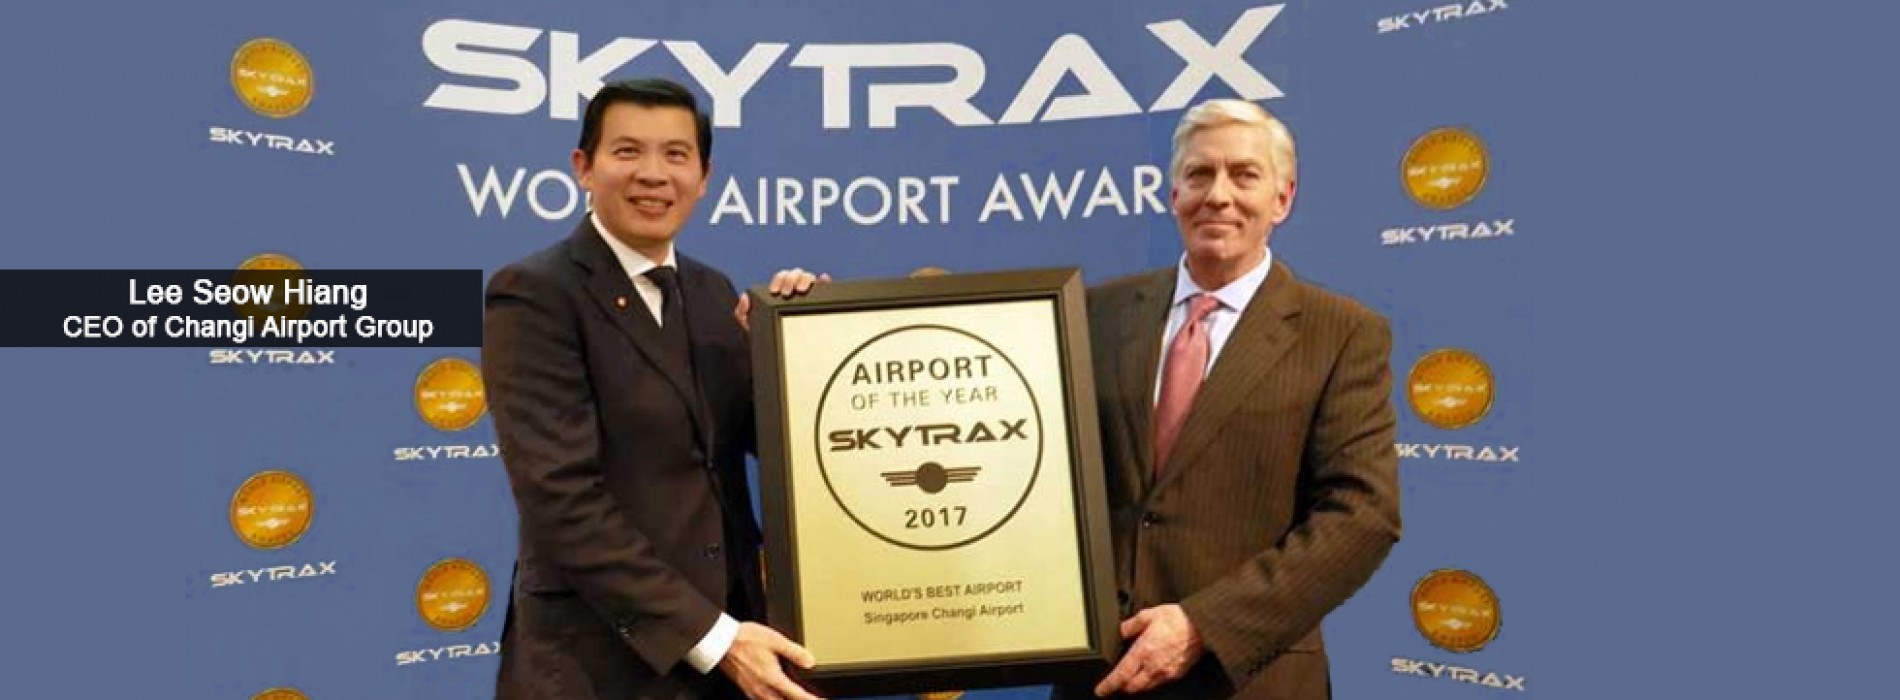 Changi Airport is named the World’s Best Airport for the fifth consecutive year